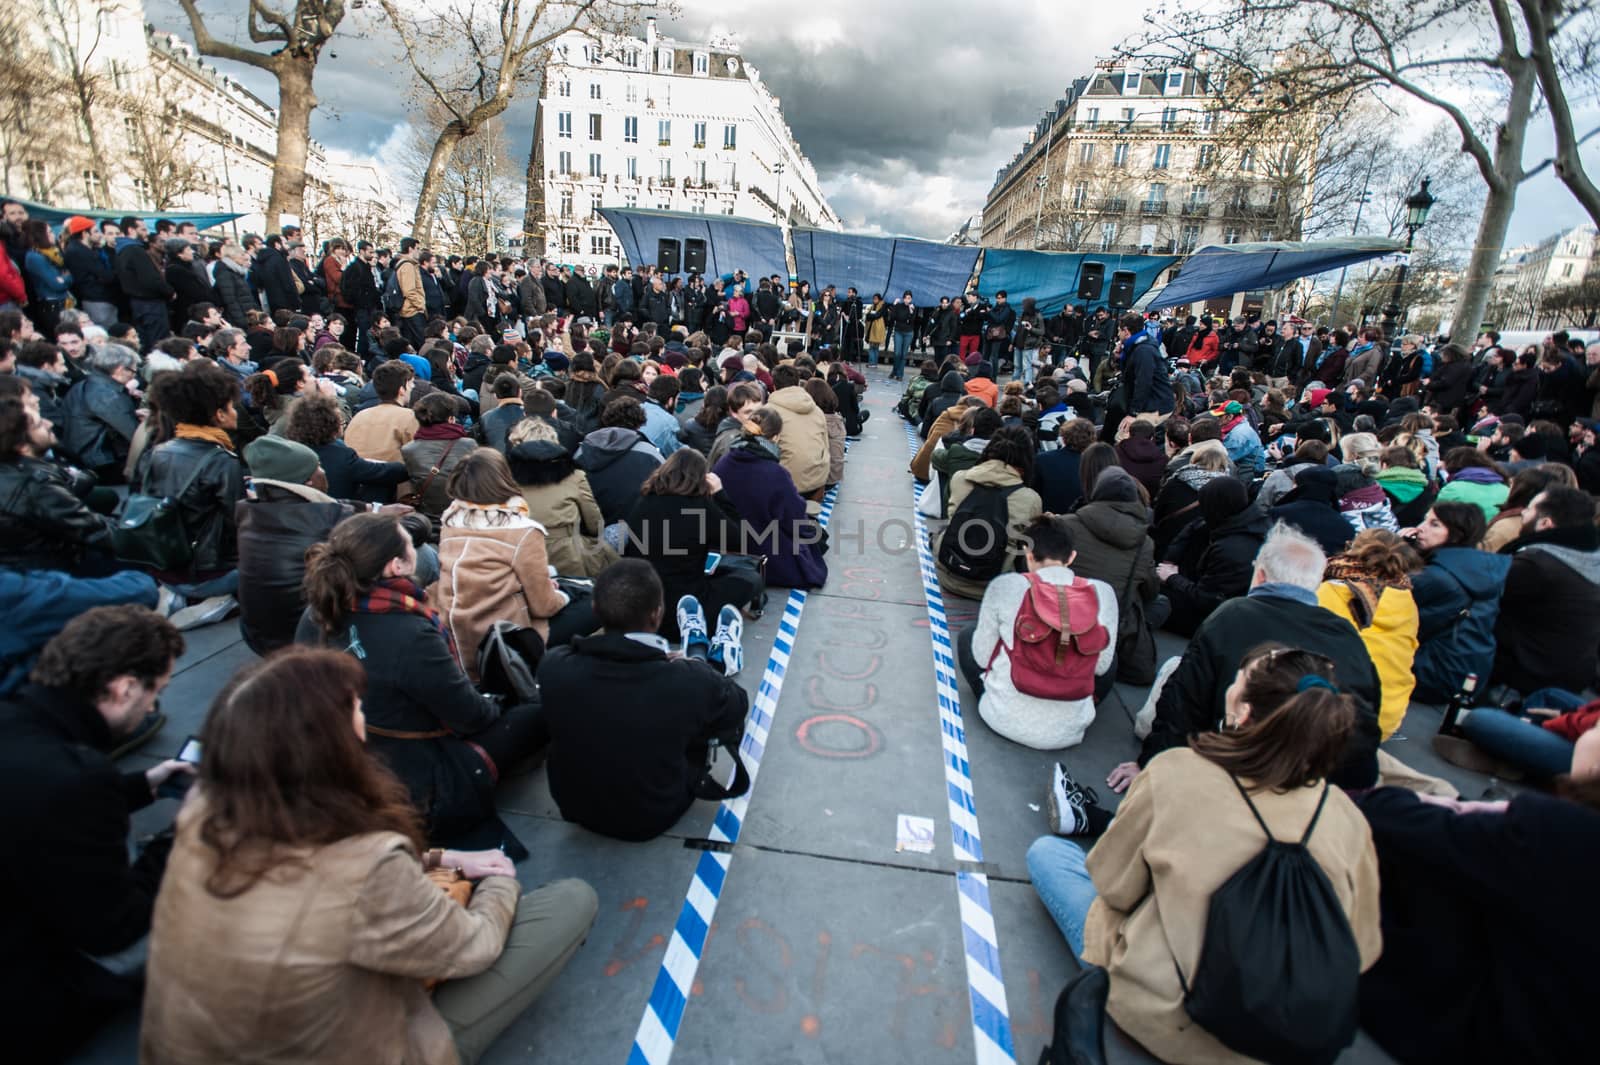 FRANCE, Paris: Thousand militants of the Nuit debout (Standing night) movement gather on April 7, 2016 at the Place de la Republique in Paris, as participants plan to spend the night camped out to protest against the government's planned labour reform and against forced evictions. It has been one week that hundred of people have occupied the square to show, at first, their opposition to the labour reforms in the wake of the nationwide demonstration which took place on March 31, 2016.